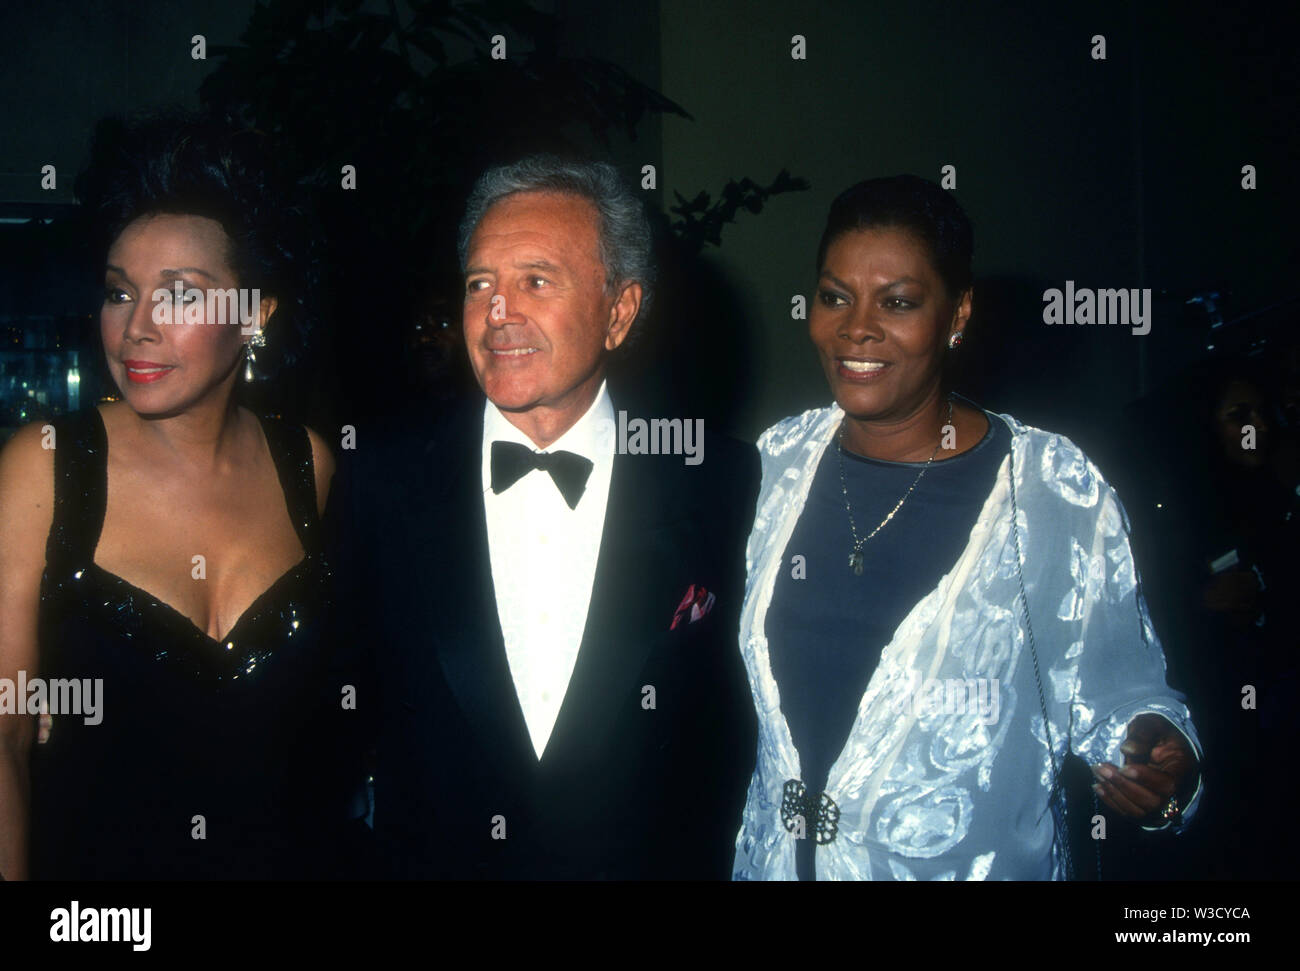 Beverly Hills, California, USA 20th September 1994 Actress Diahann Carroll, husband singer Vic Damone and singer Dionne Warwick attend the 1994 Diversity Awards on September 20, 1994 at the Beverly Hilton Hotel in Beverly Hills, California, USA. Photo by Barry King/Alamy Stock Photo Stock Photo